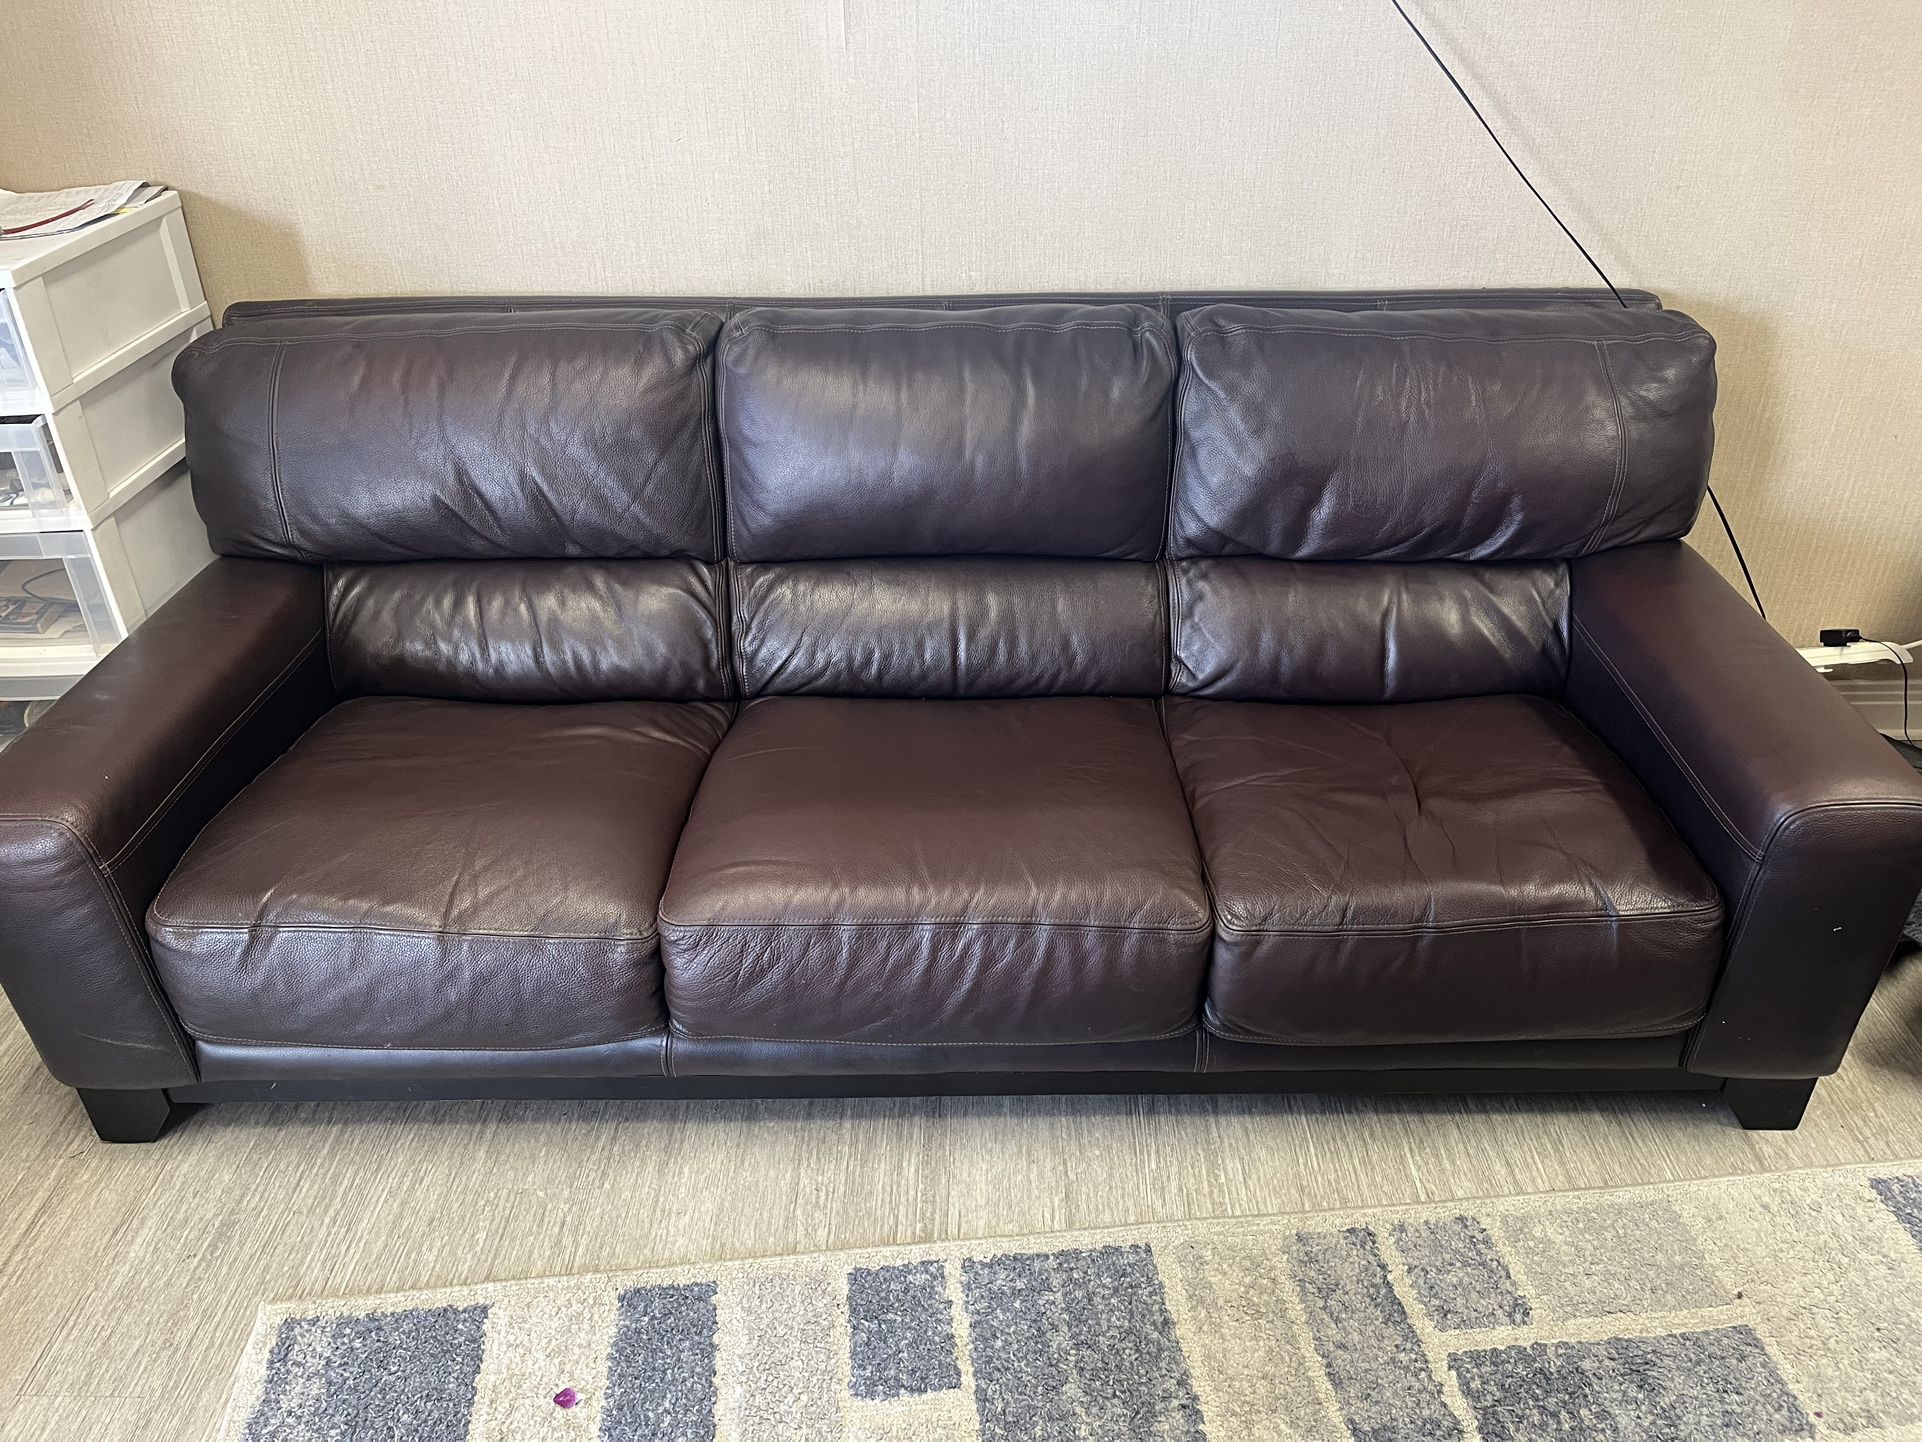 Leather Couch - Good Condition, High Quality